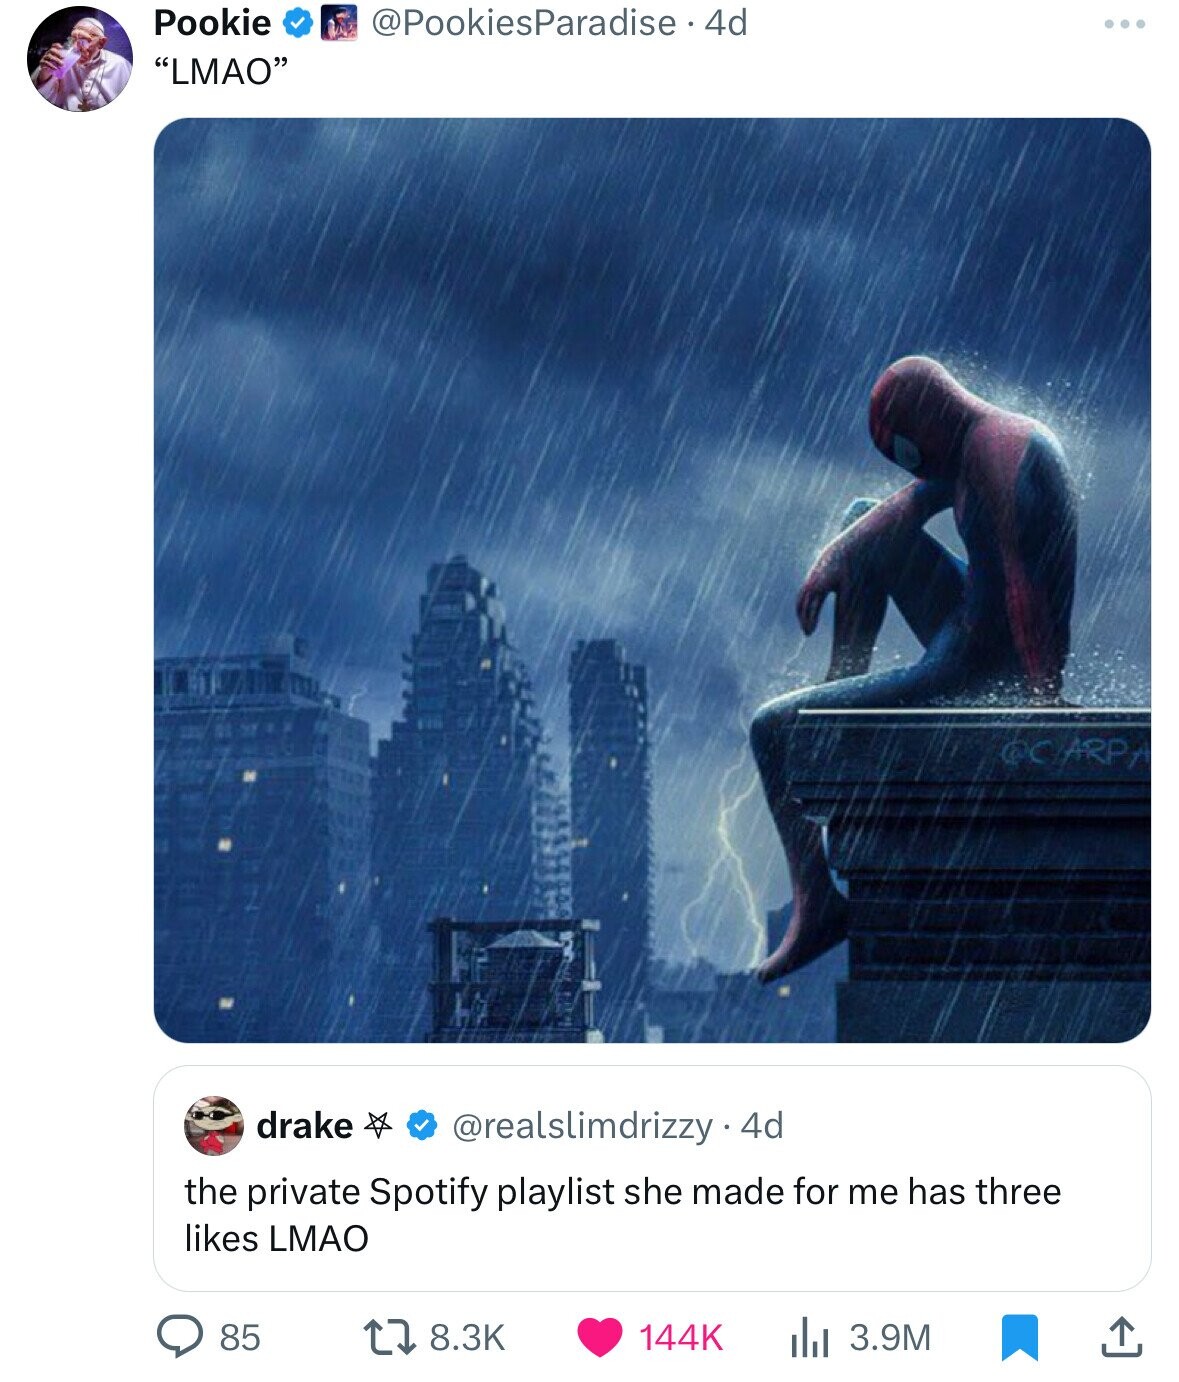 spiderman sad - Pookie "Lmao" 4d Carpa drake 4d the private Spotify playlist she made for me has three Lmao 85 17 l 3.9M